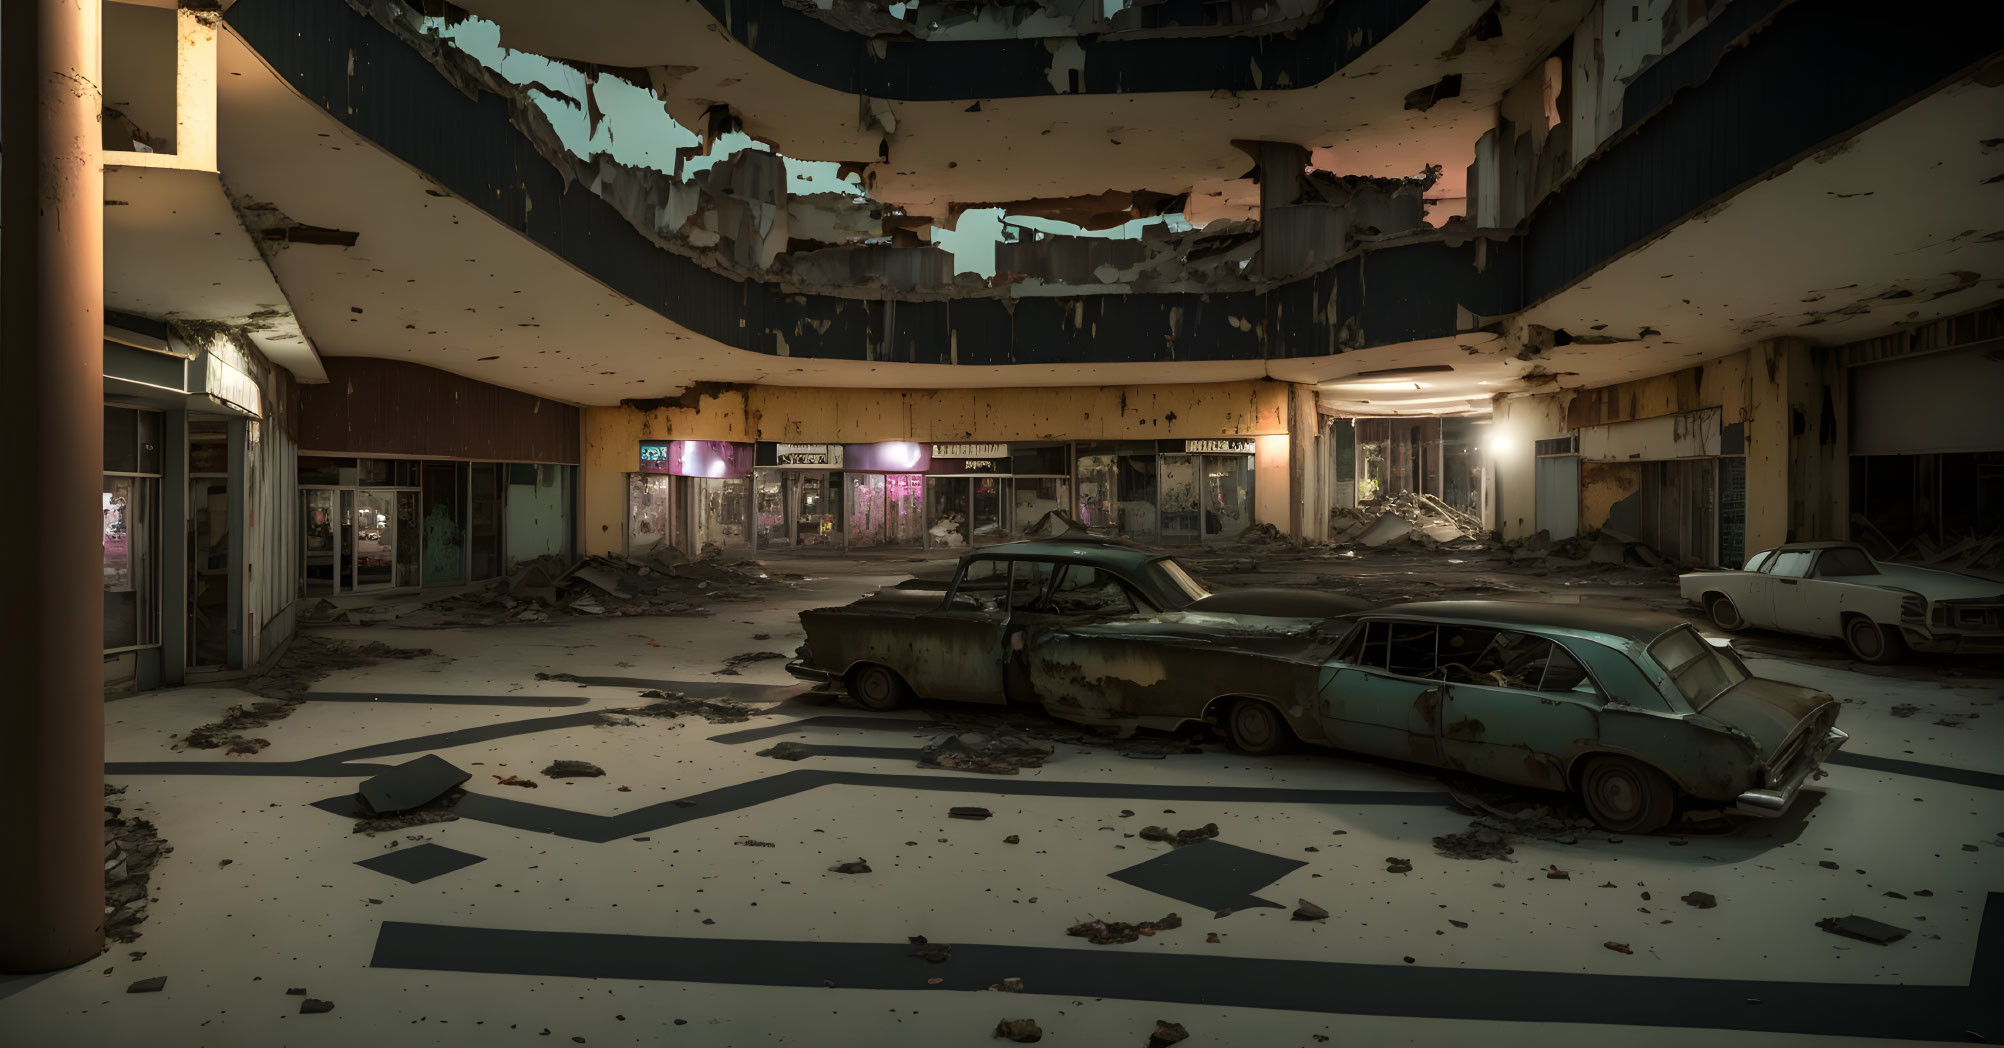 Deteriorated abandoned shopping mall interior with somber atmosphere